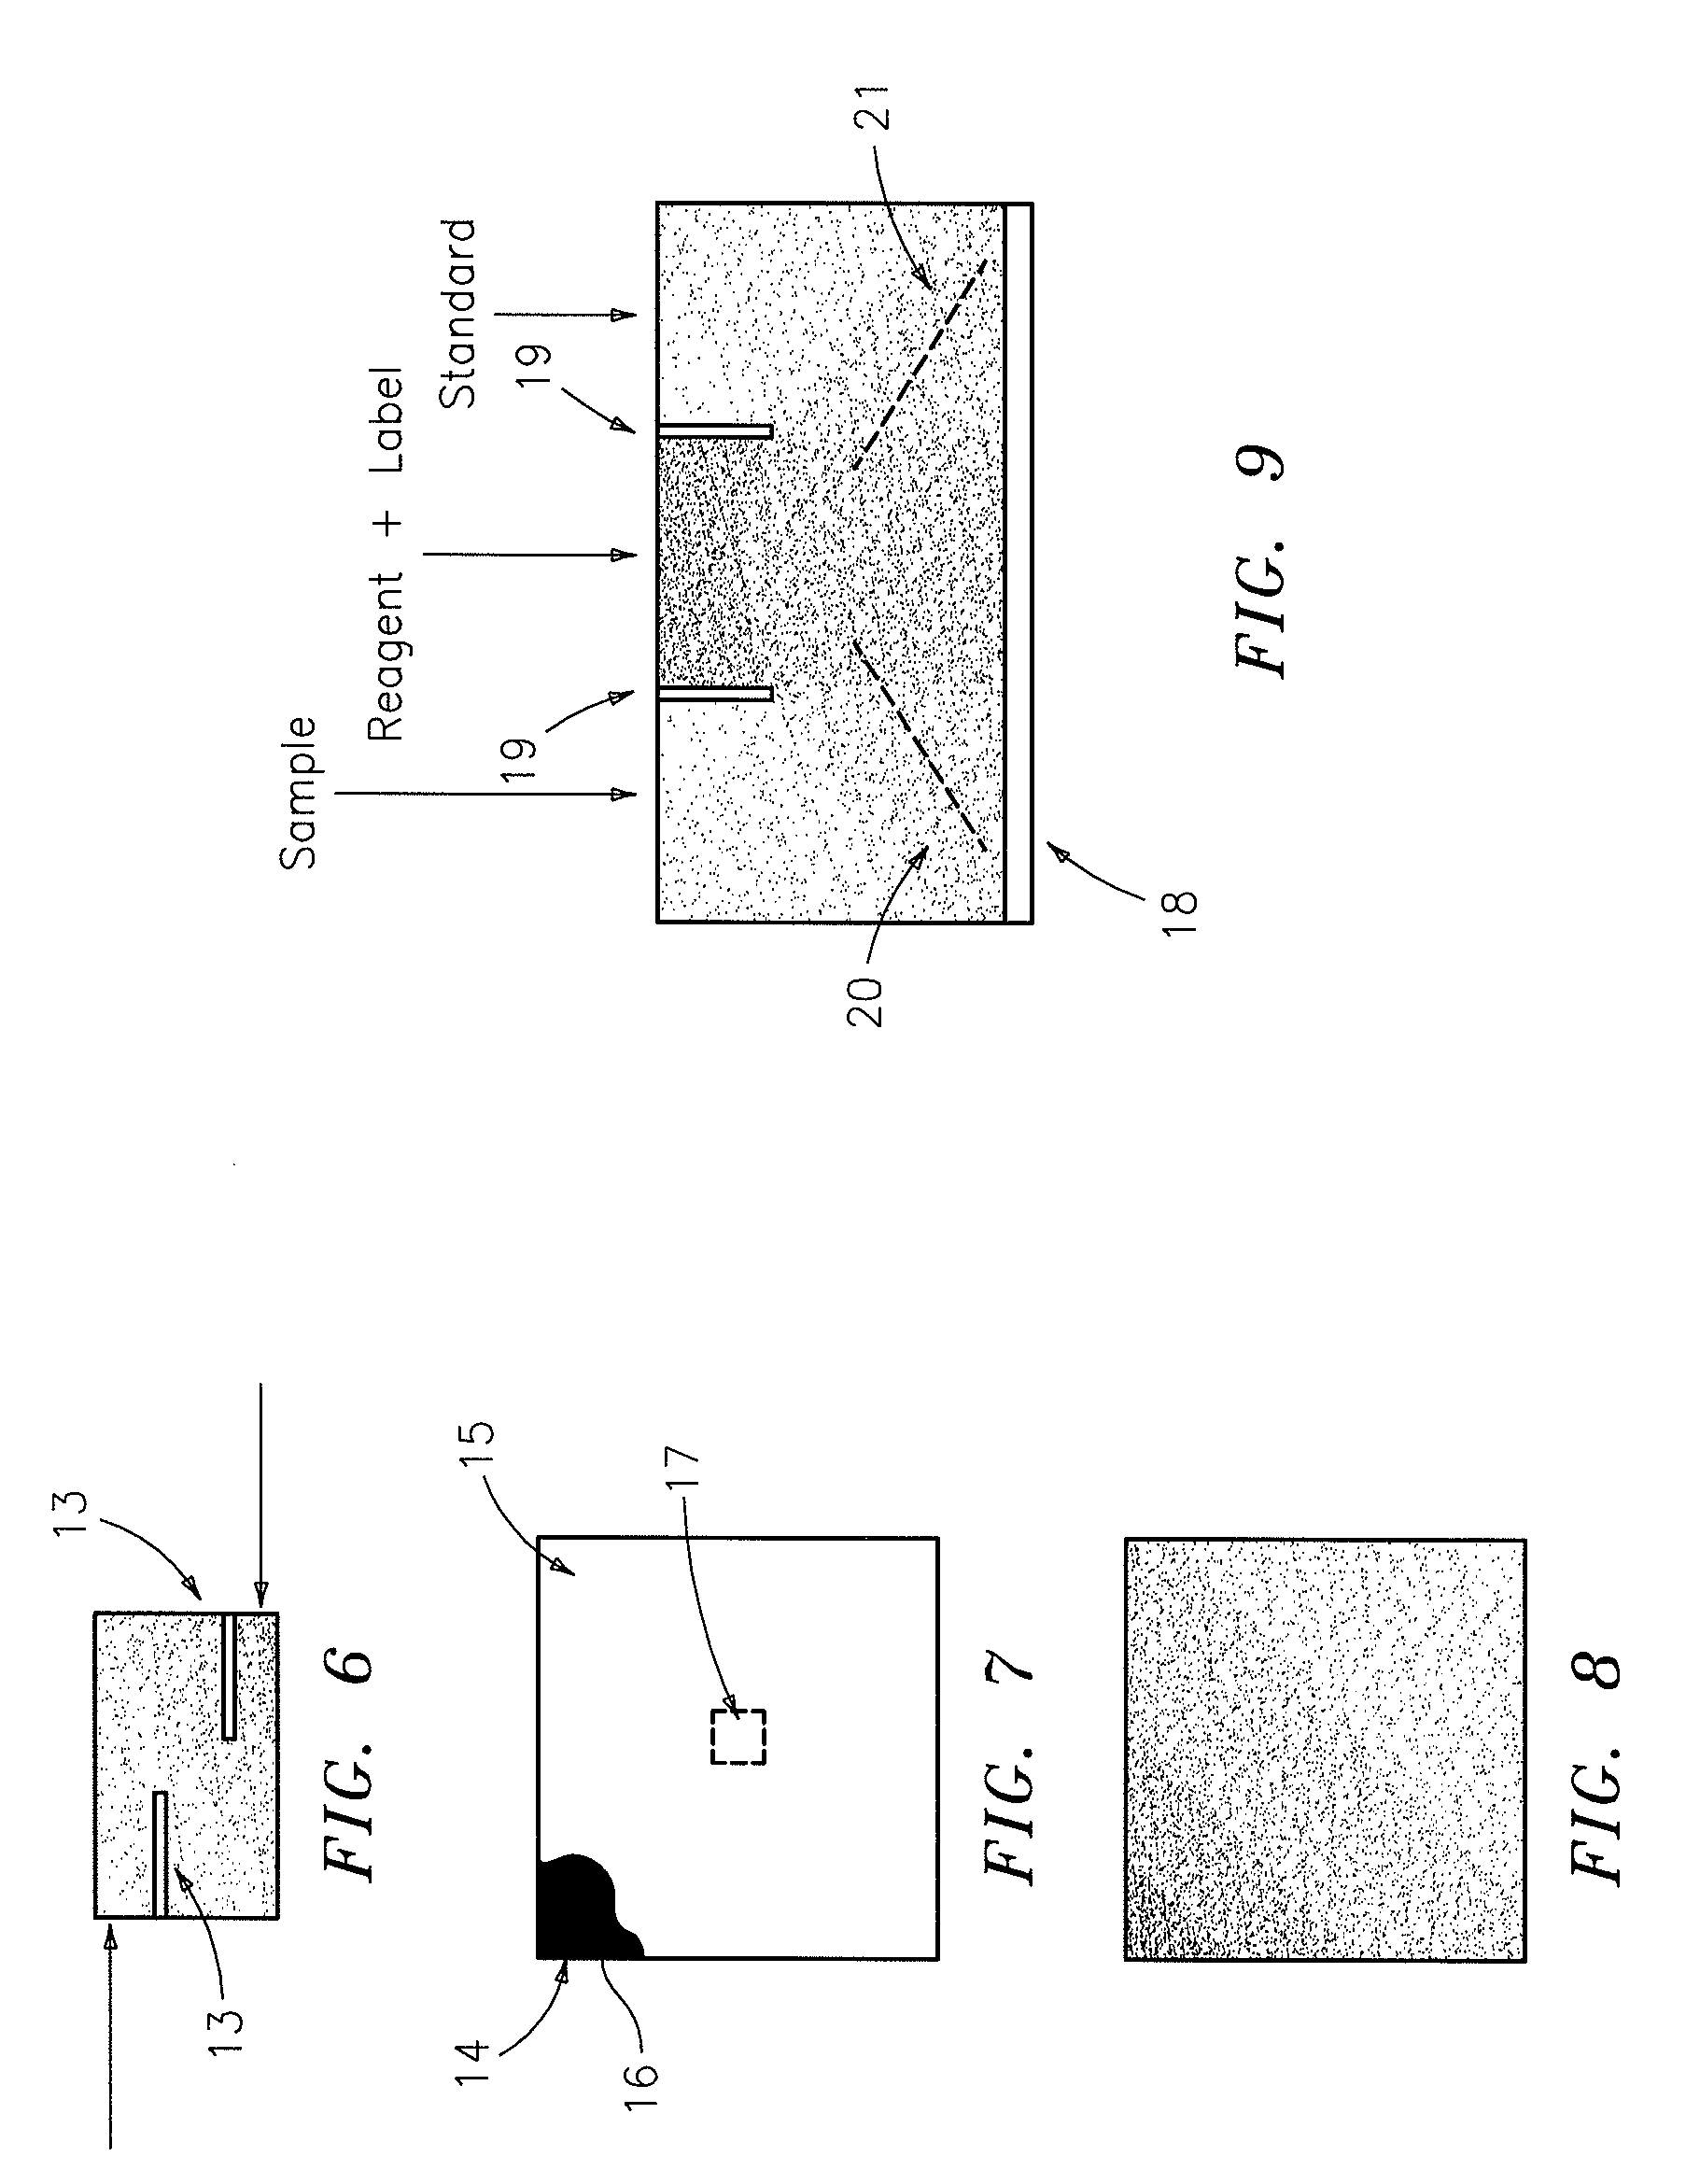 Method for serologic agglutination and other immunoassays performed in a thin film fluid sample